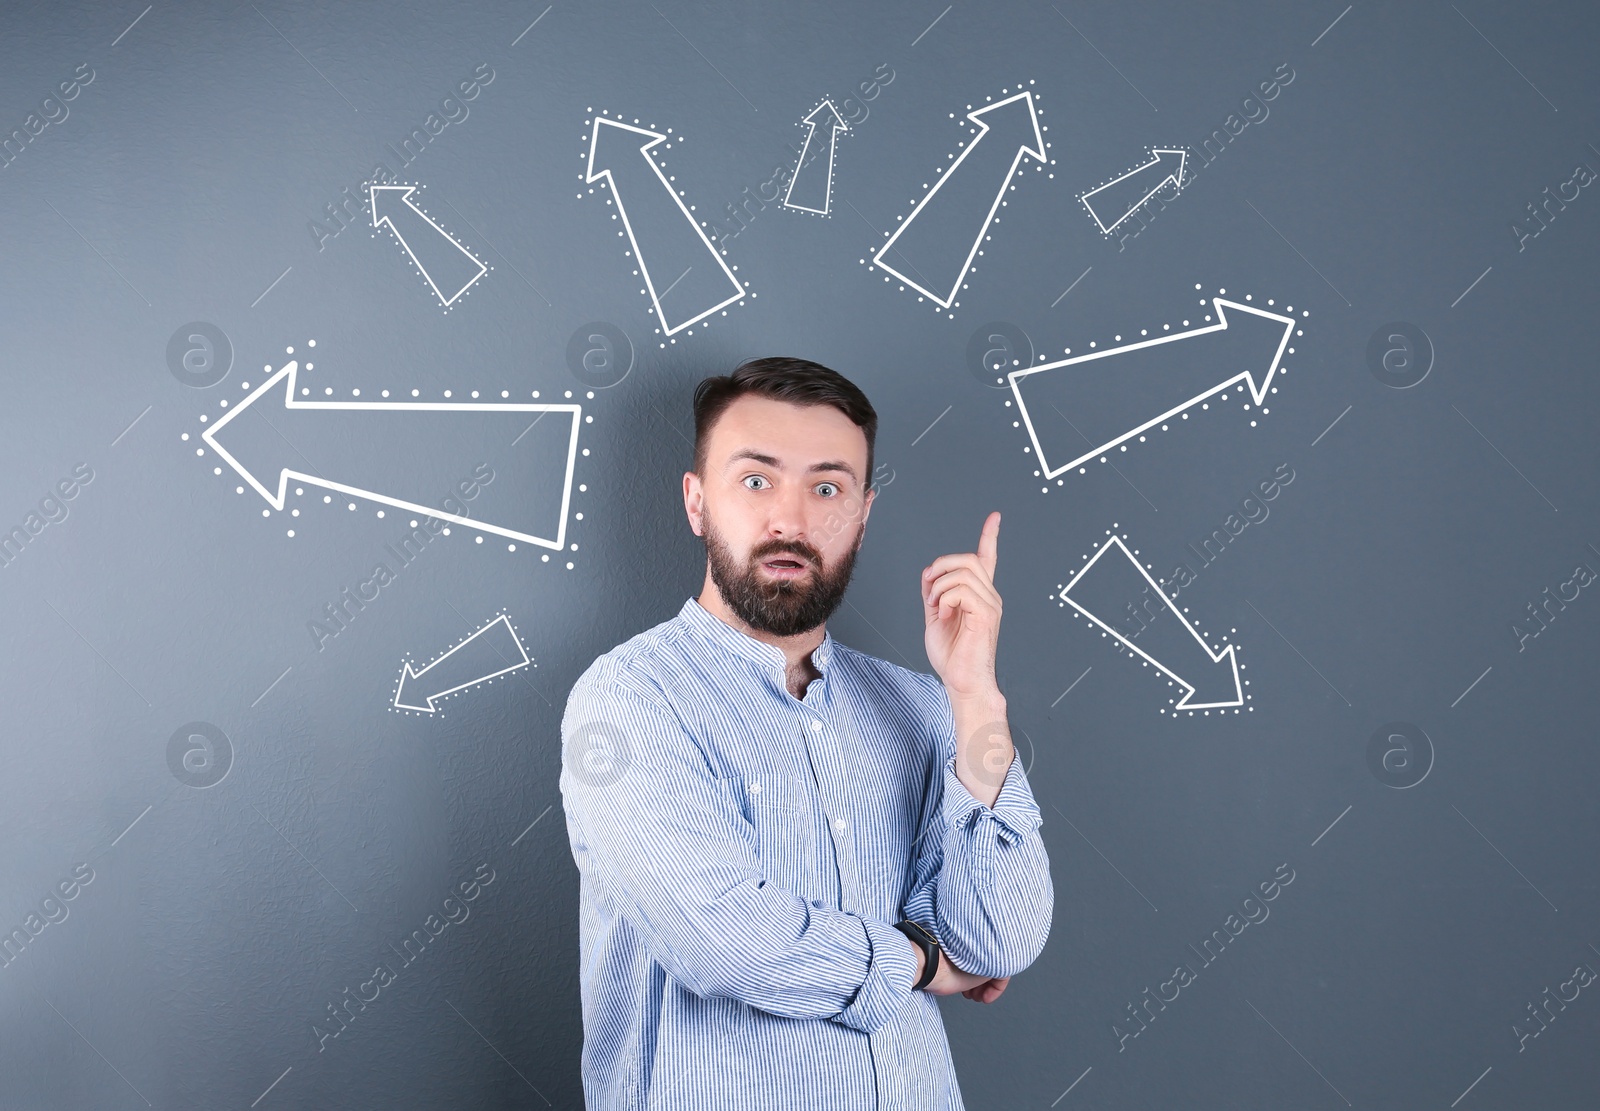 Image of Choice in profession or other areas of life, concept. Making decision, emotional man surrounded by drawn arrows on grey background